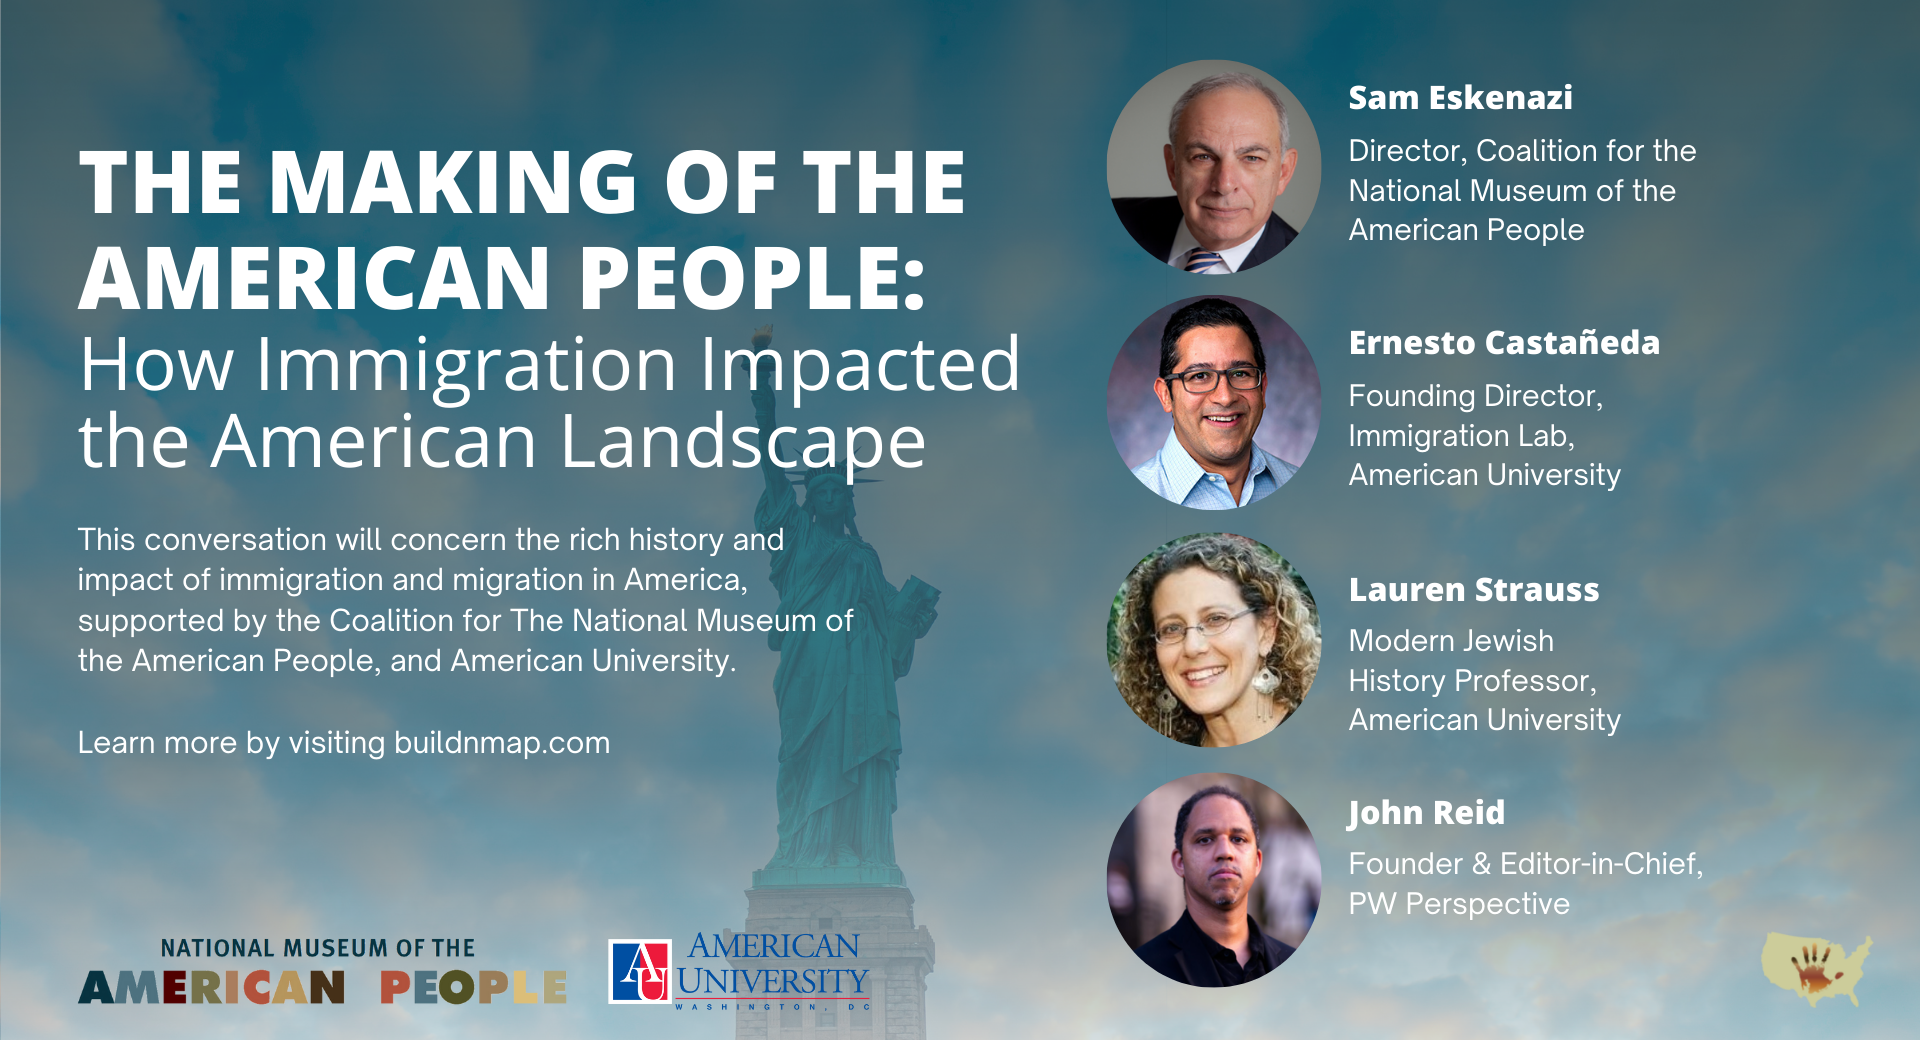 Video: The Making of the American People Panel